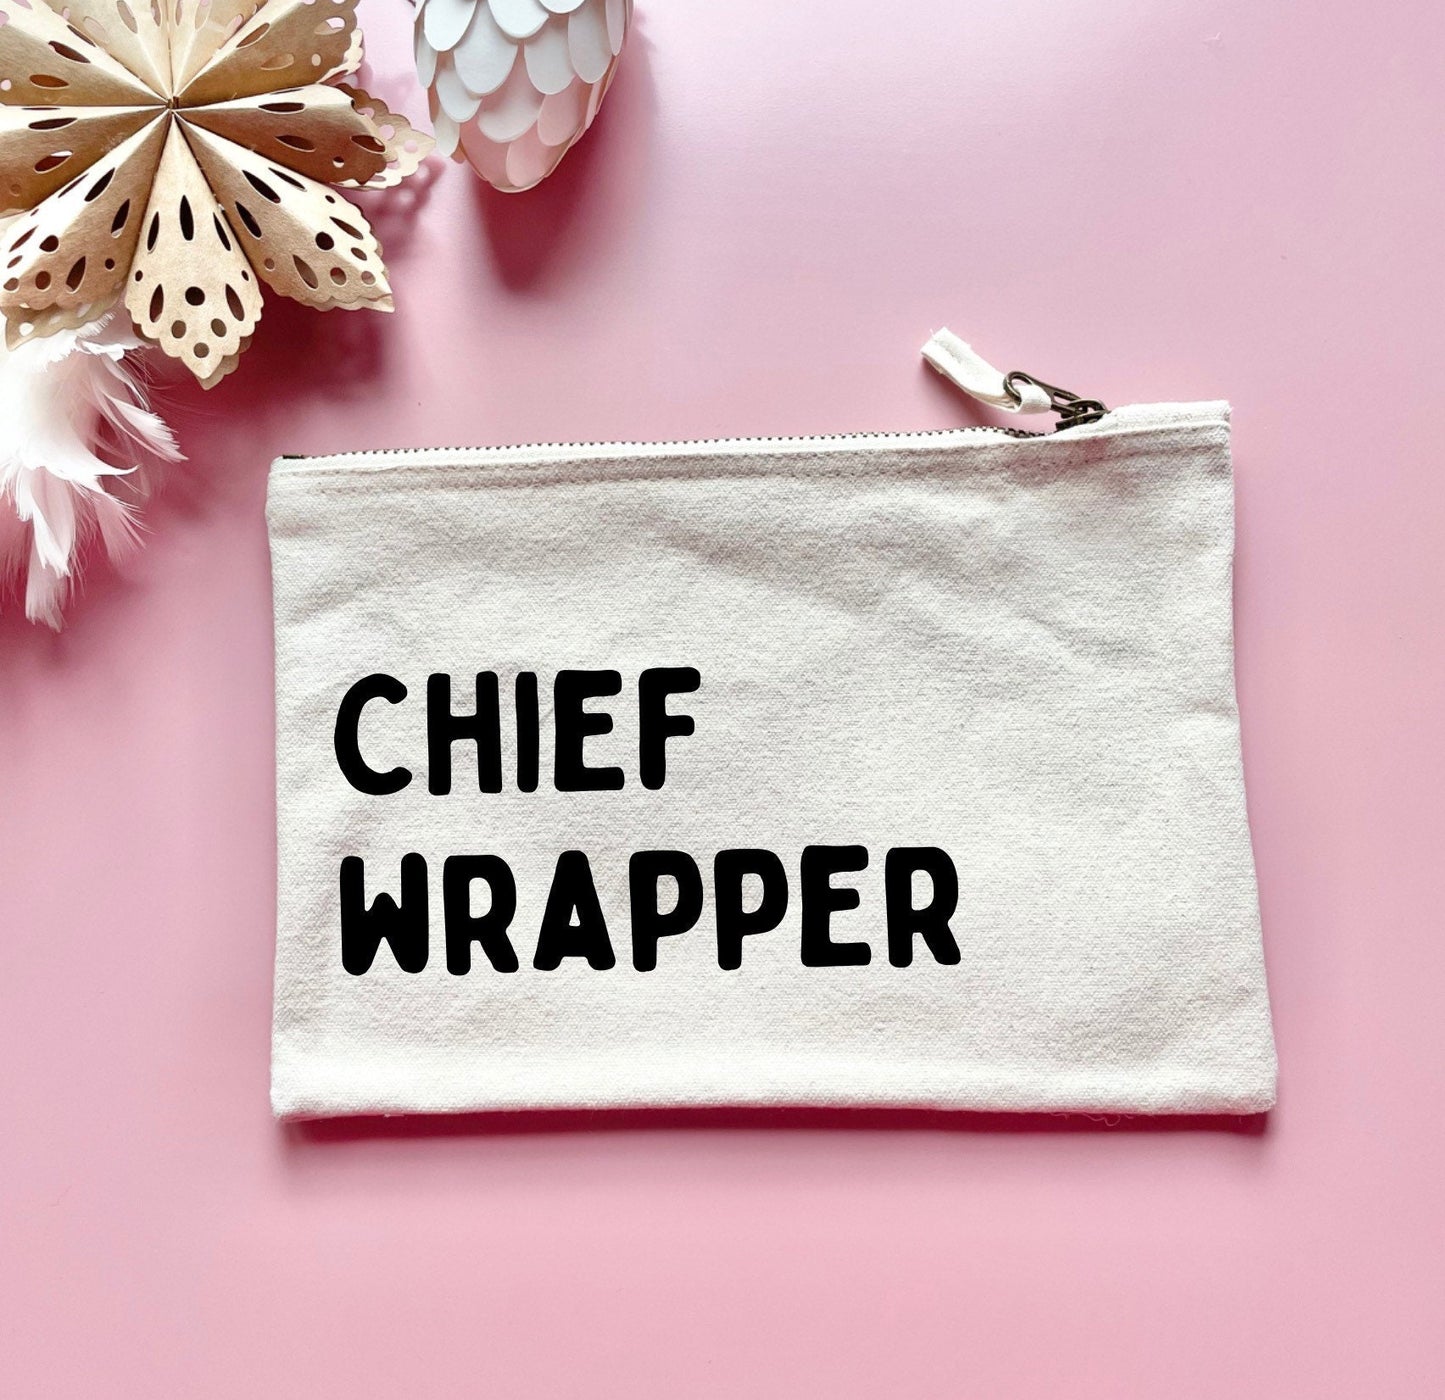 Chief Wrapper Pouch, Christmas pouch, Christmas bag to store present wrapping ribbon, bows, scissors and tape for Xmas eve wrapping